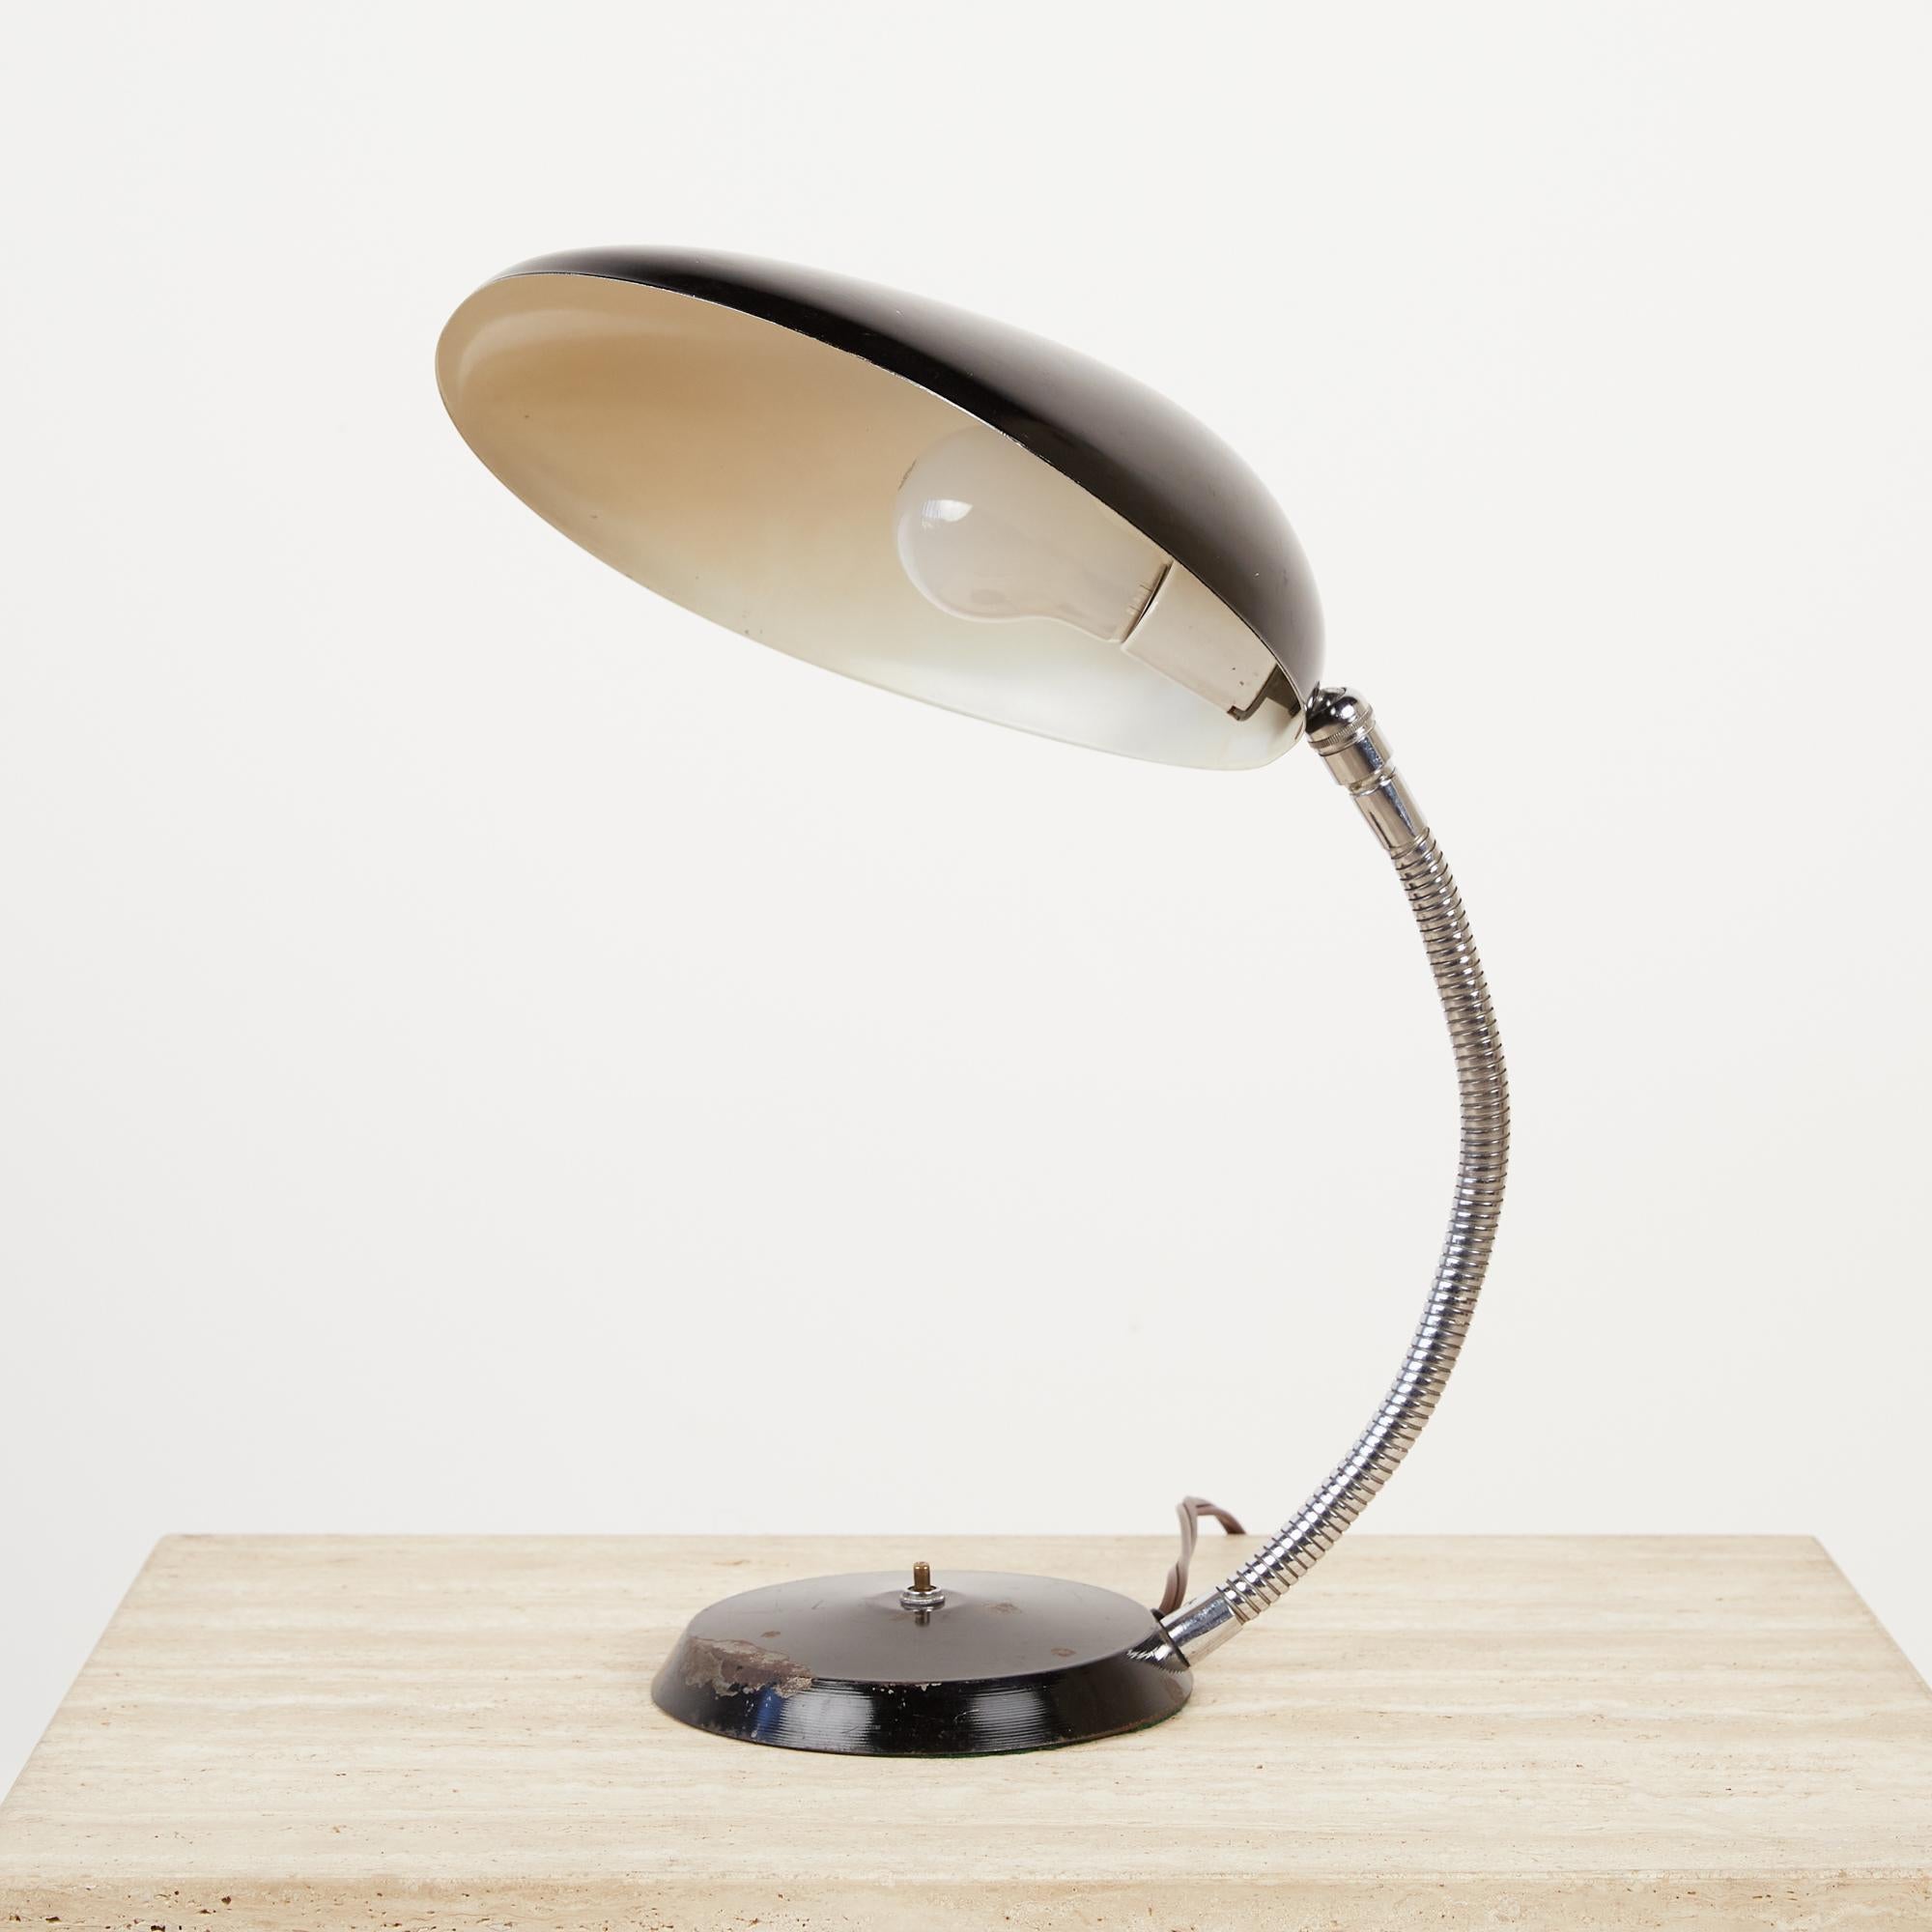 An award-winning 1948 design by Swedish-American Greta Grossman for Ralph O. Smith, a California-based lighting company. The lamp, colloquially known as the “Cobra” for its uniquely shaped shade that resembles a cobra’s hood, is counterweighted with